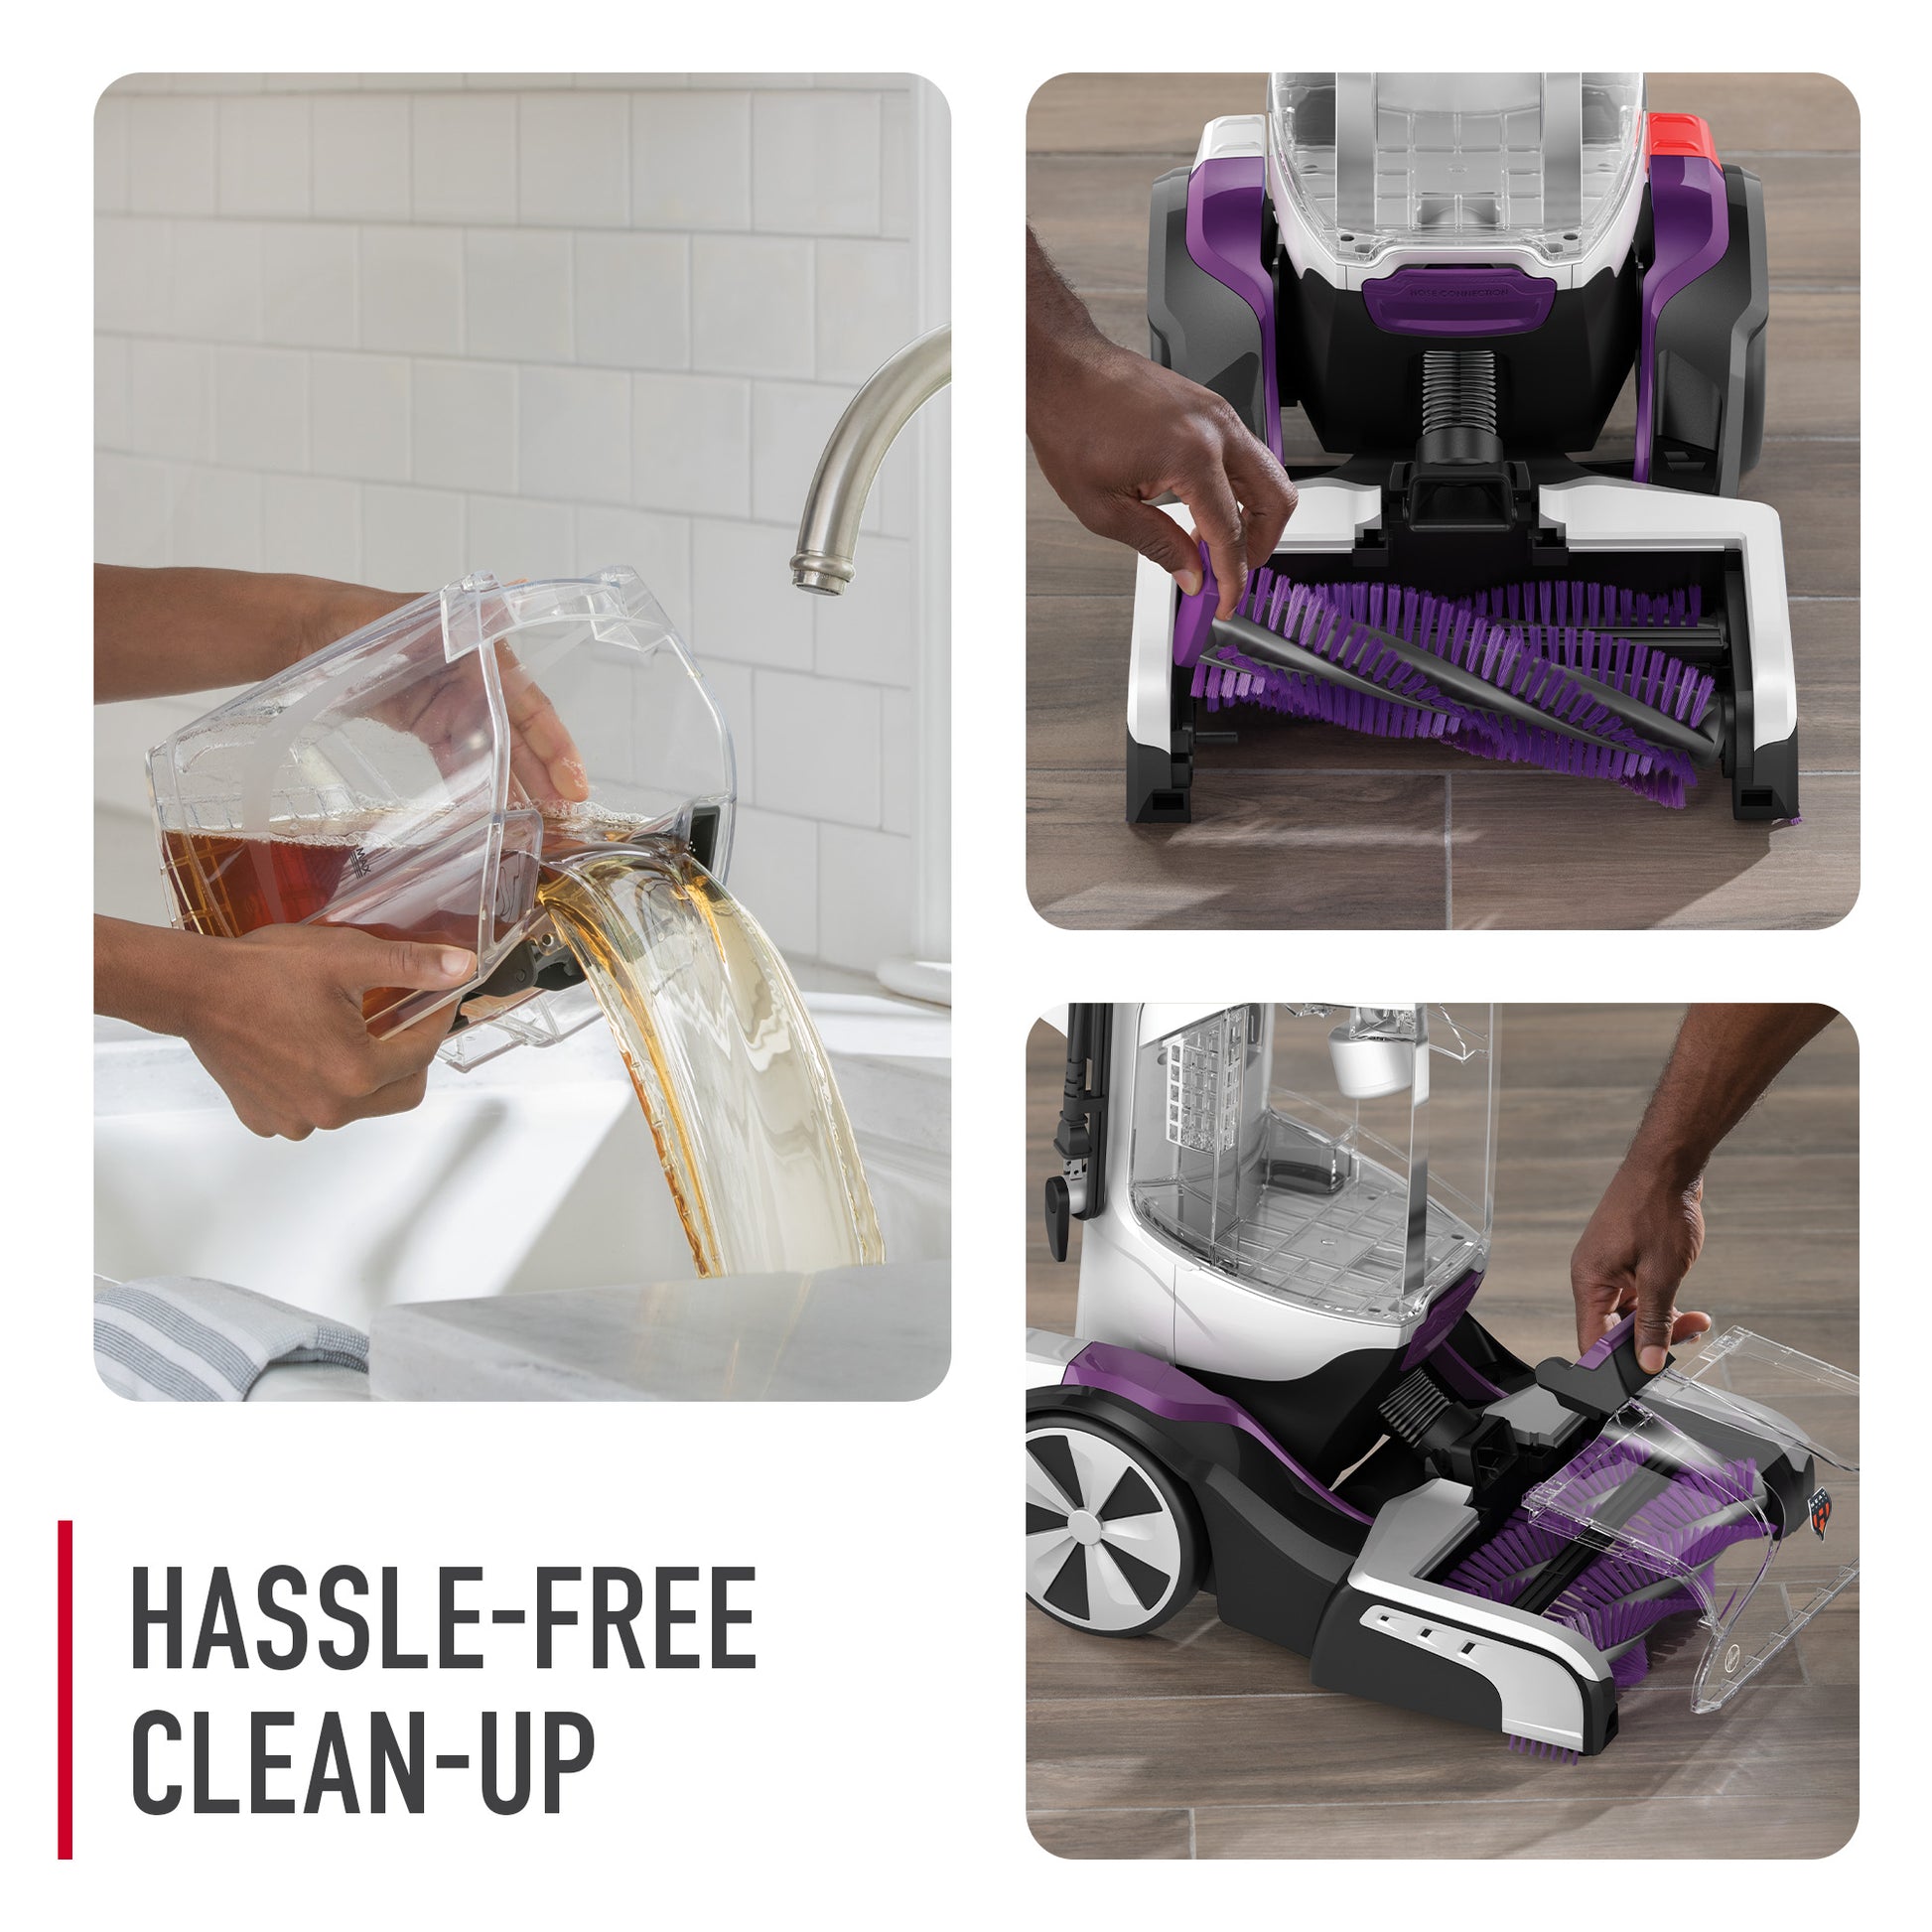 3 close ups of Hoover smartwash pet complete automatic carpet cleaner highlighting a hassle free clean up with easy empty tank and removable brush rolls